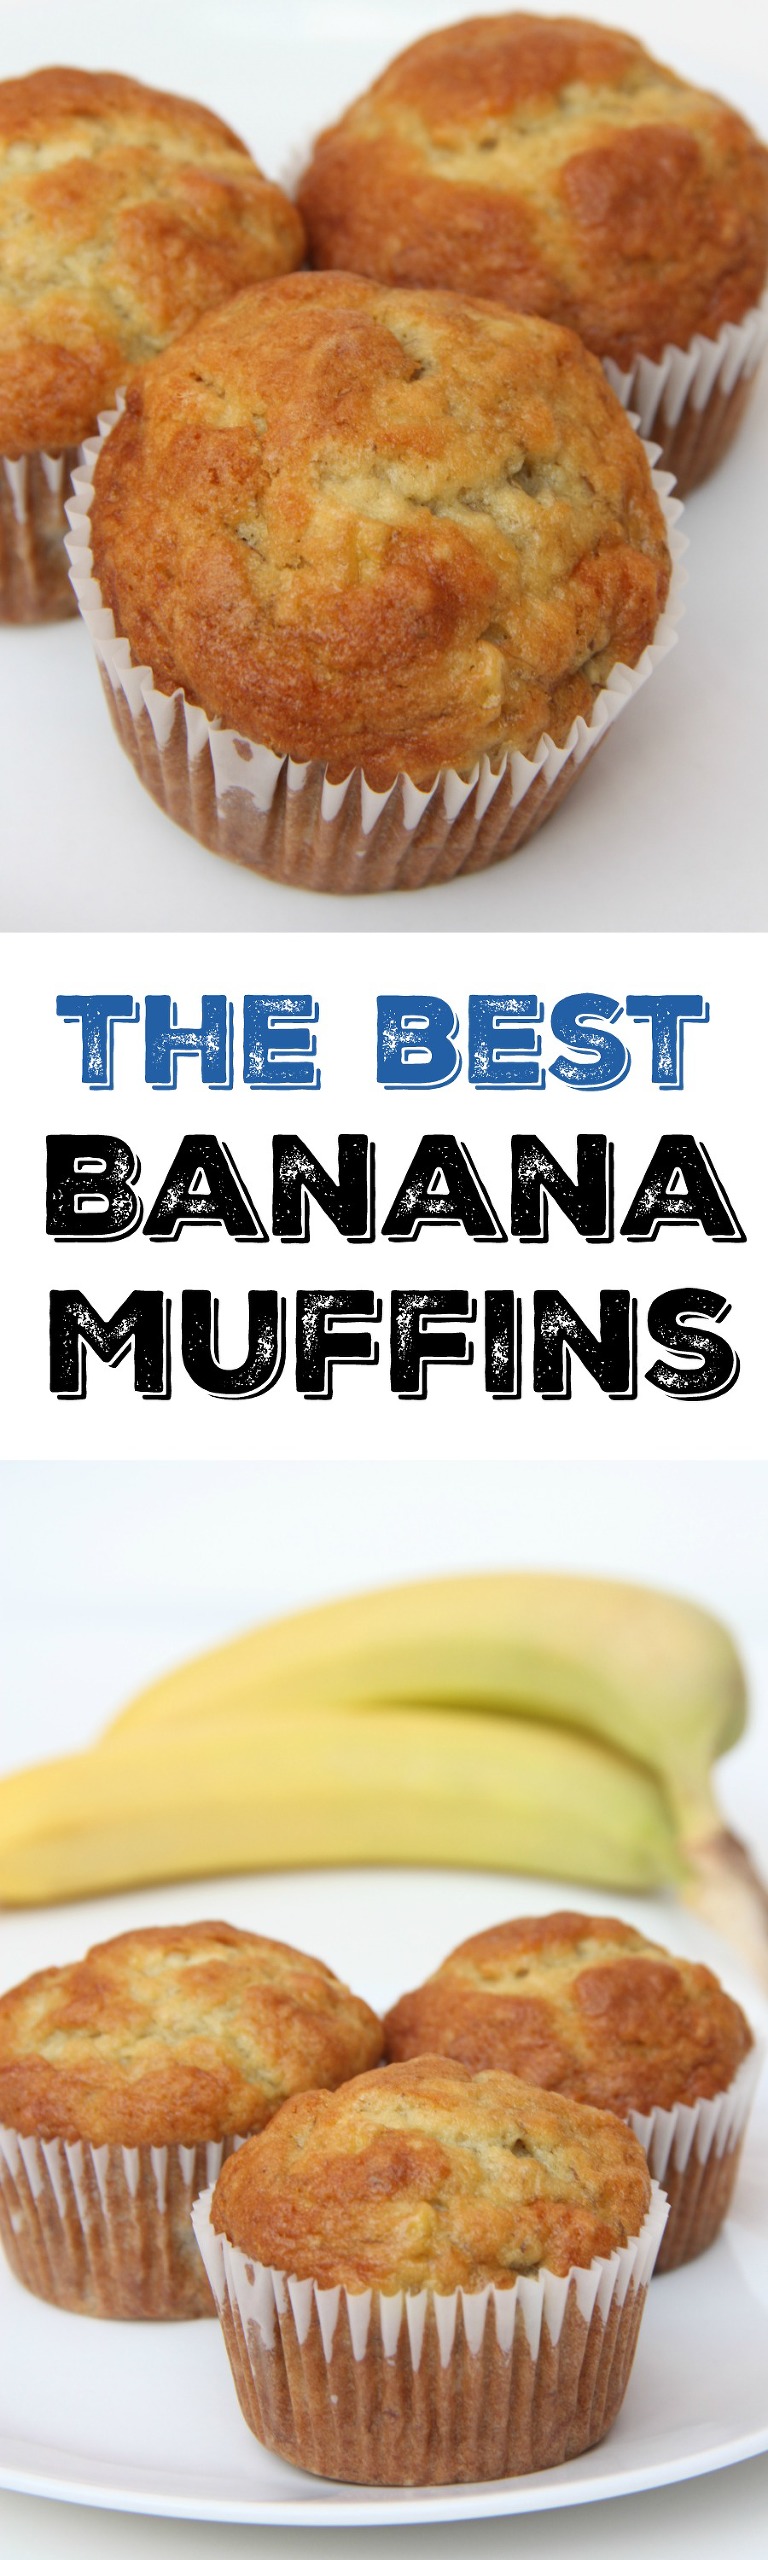 The best banana muffin recipe. The perfect breakfast recipe idea to use overripe bananas. This muffin recipe is so easy and the best muffins we've ever made!